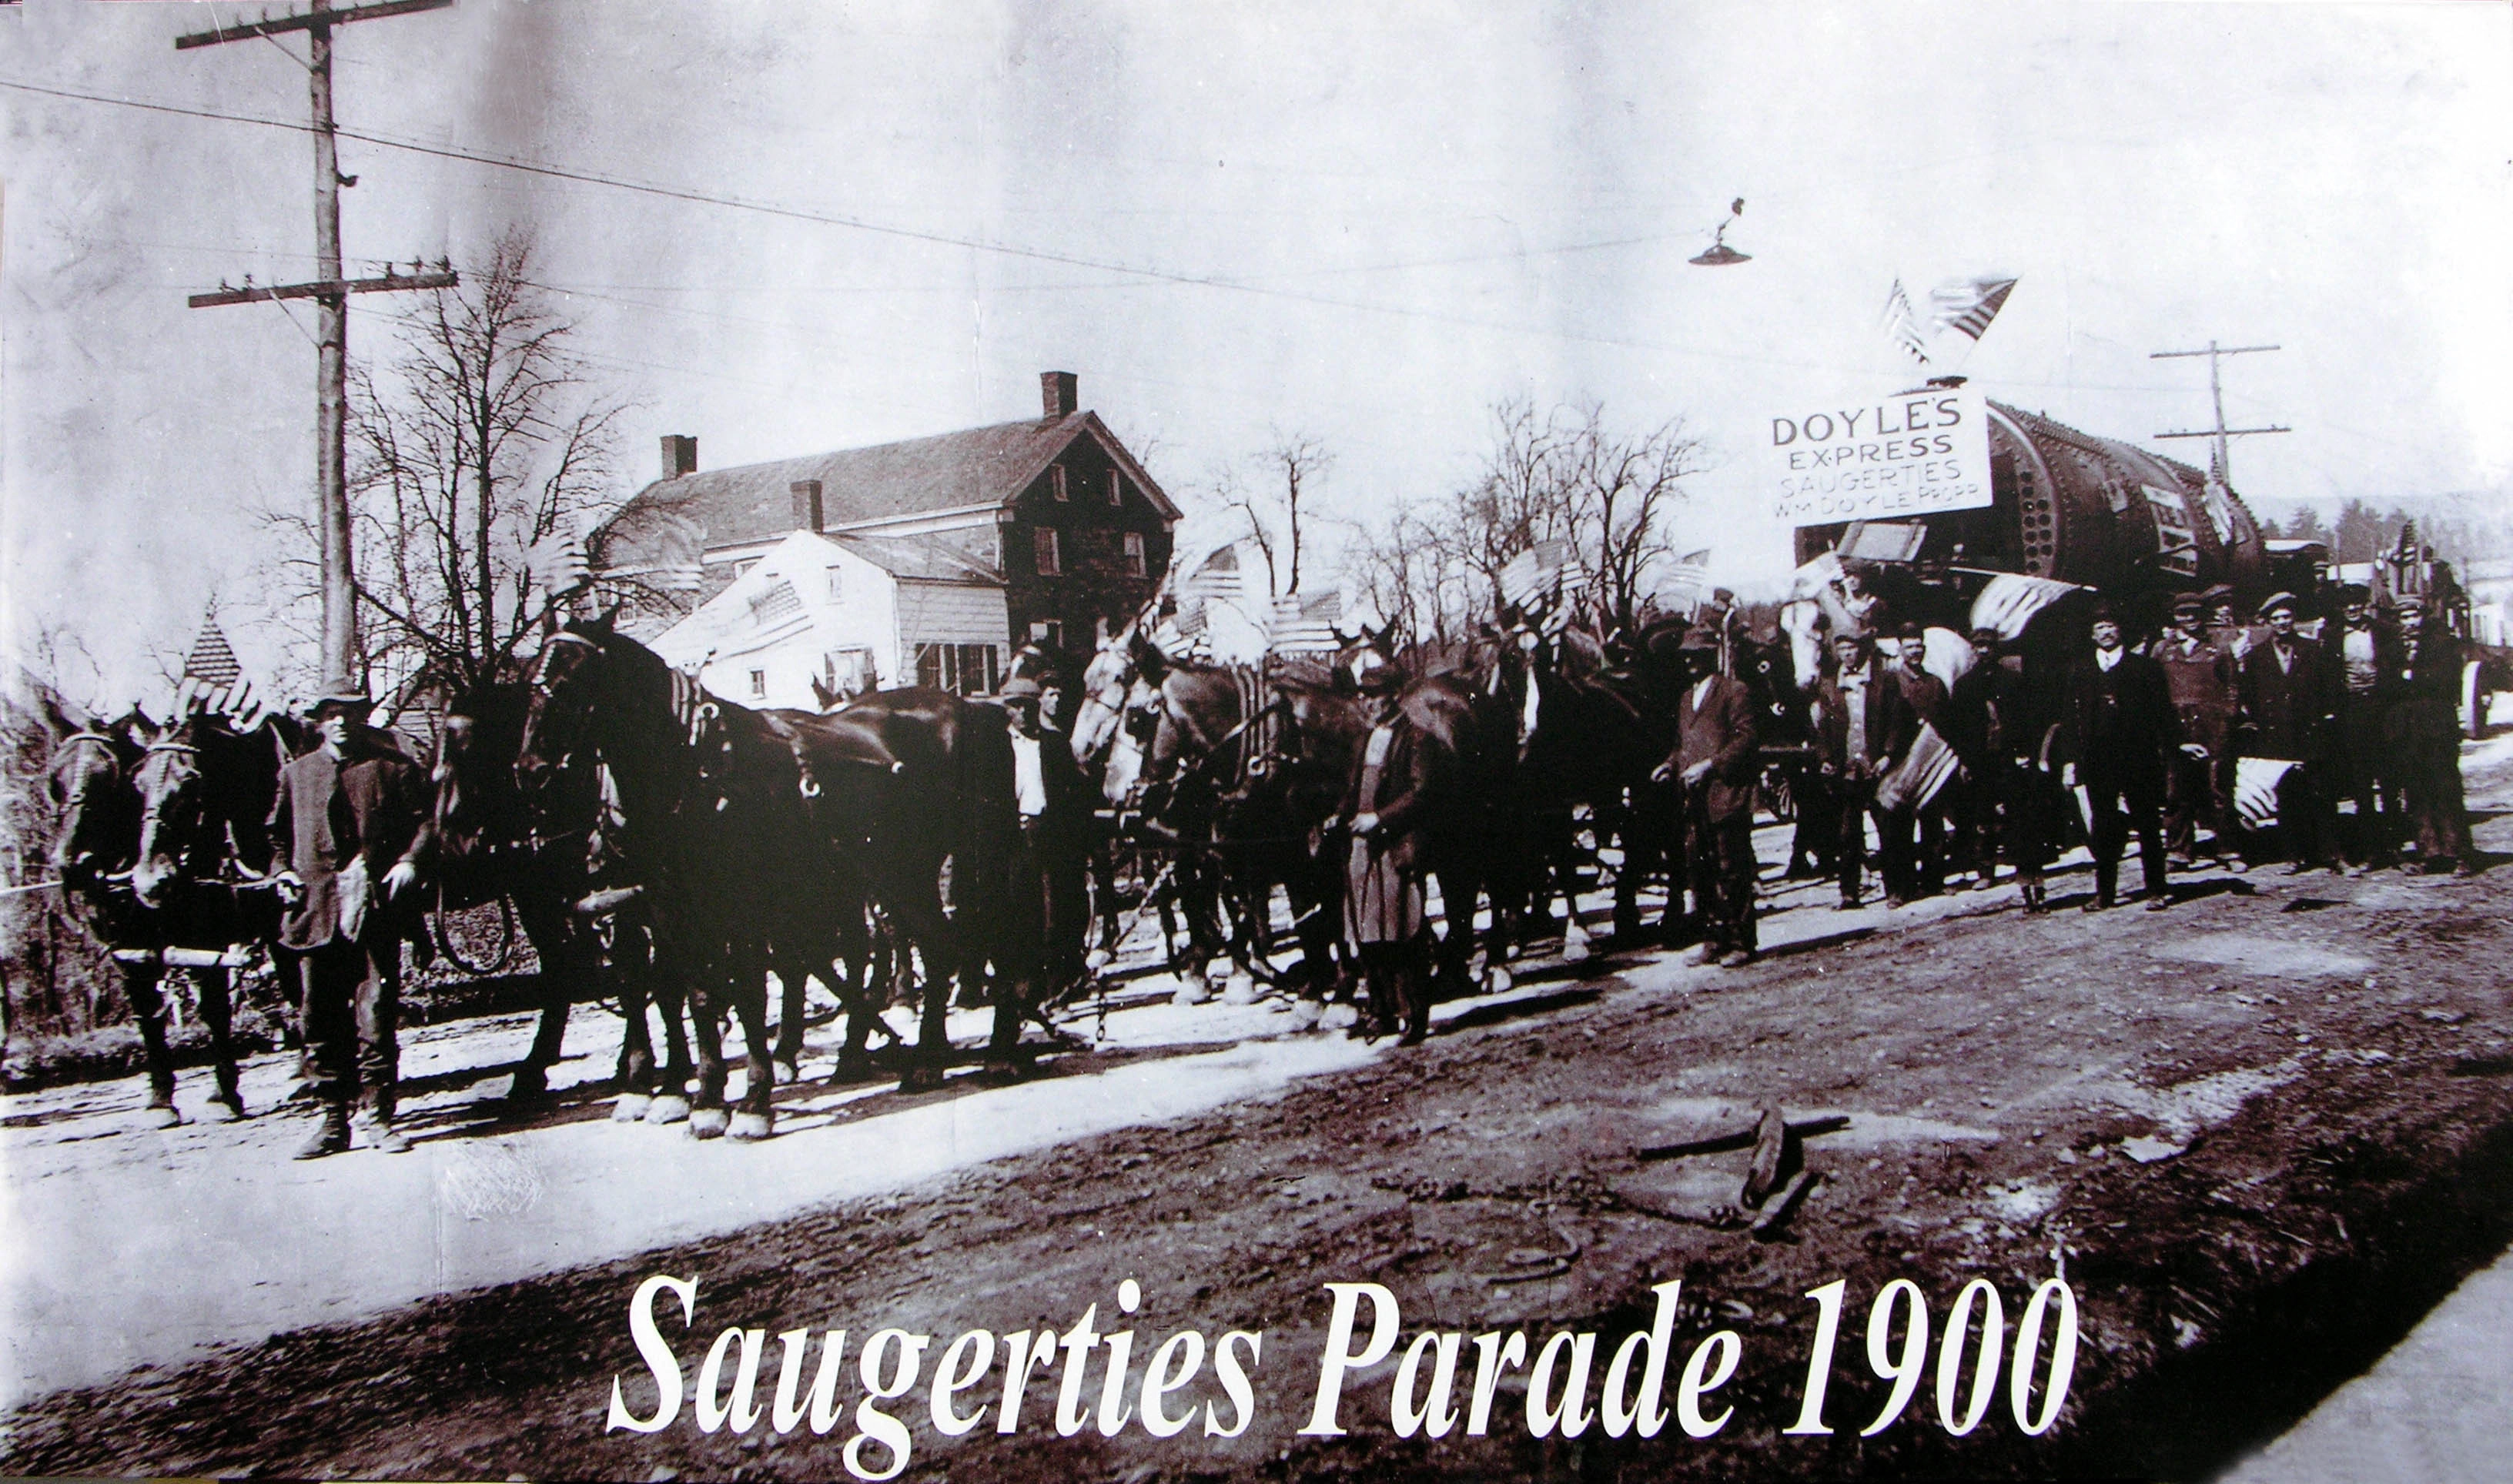 Historical photo of a Saugerties parade in the year 1900 